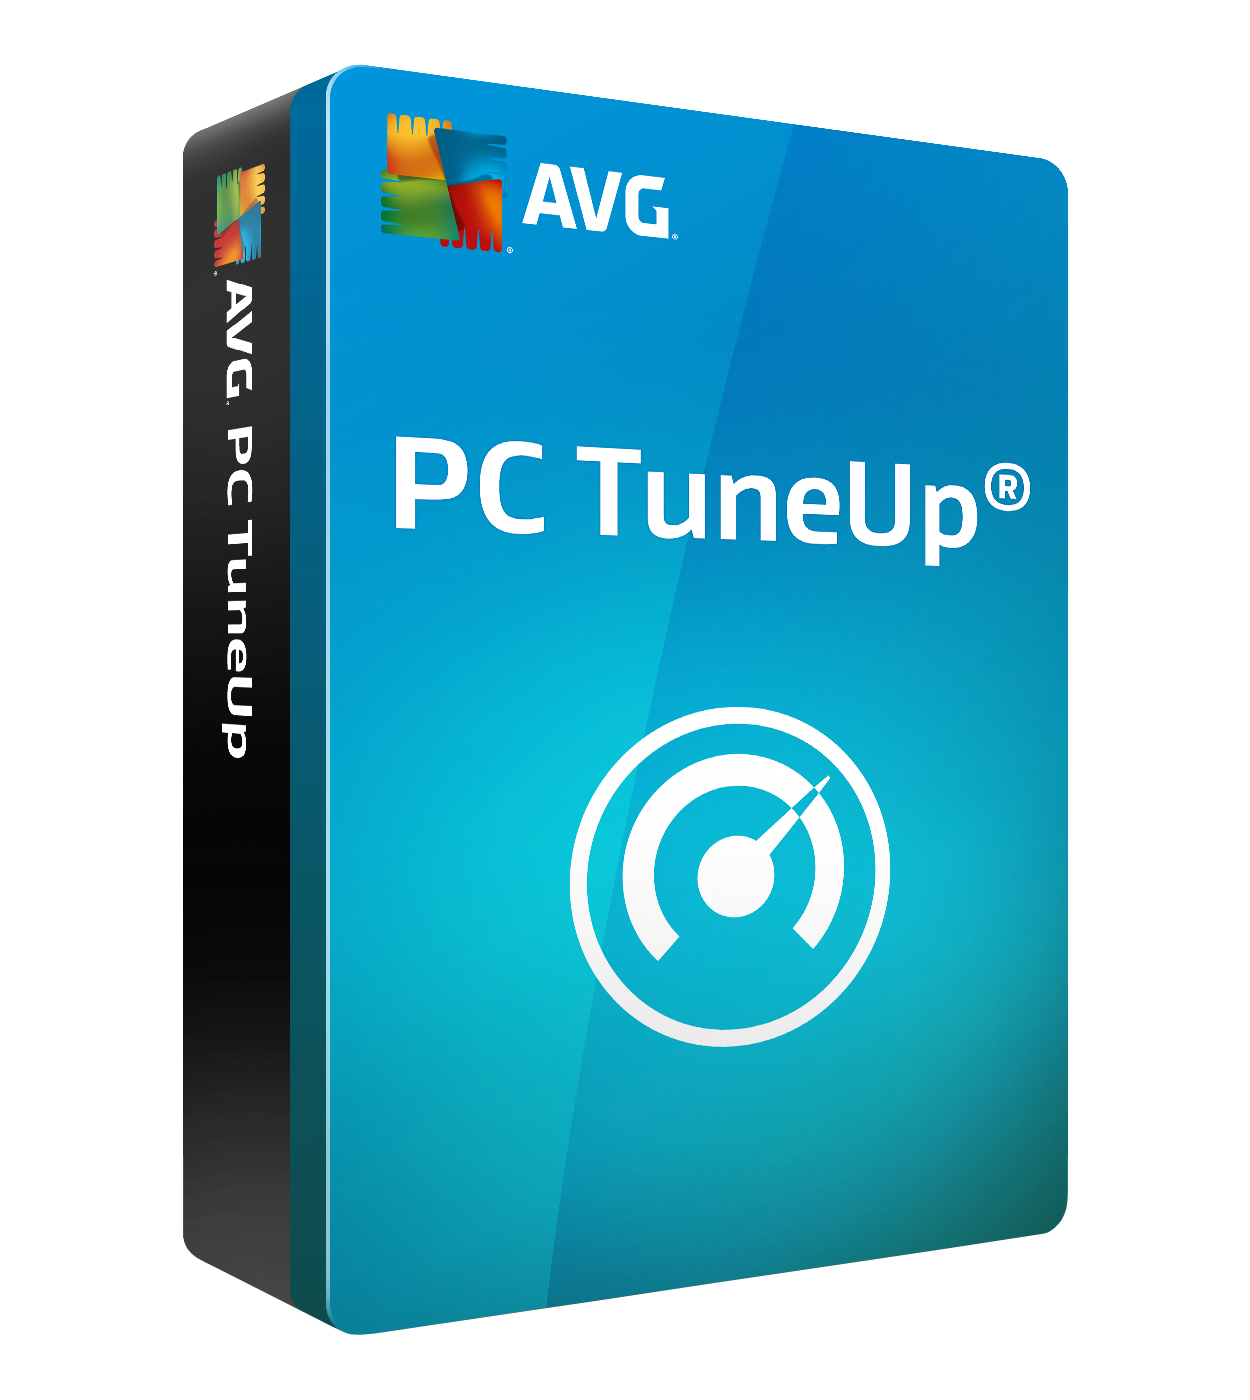 AVG PC TuneUp 10 Devices 2 Years